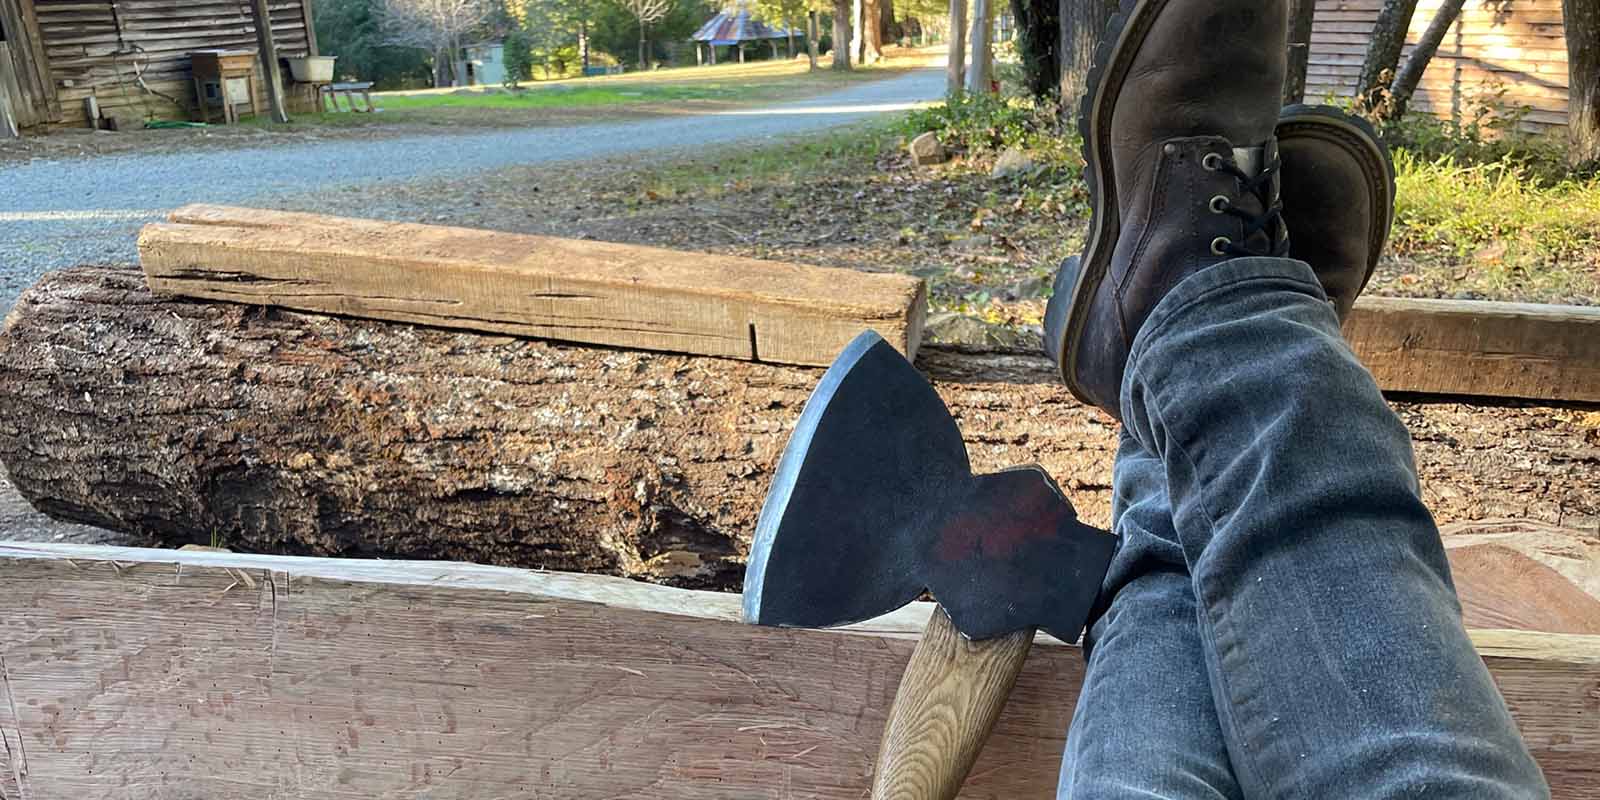 axe and legs propped up against a log